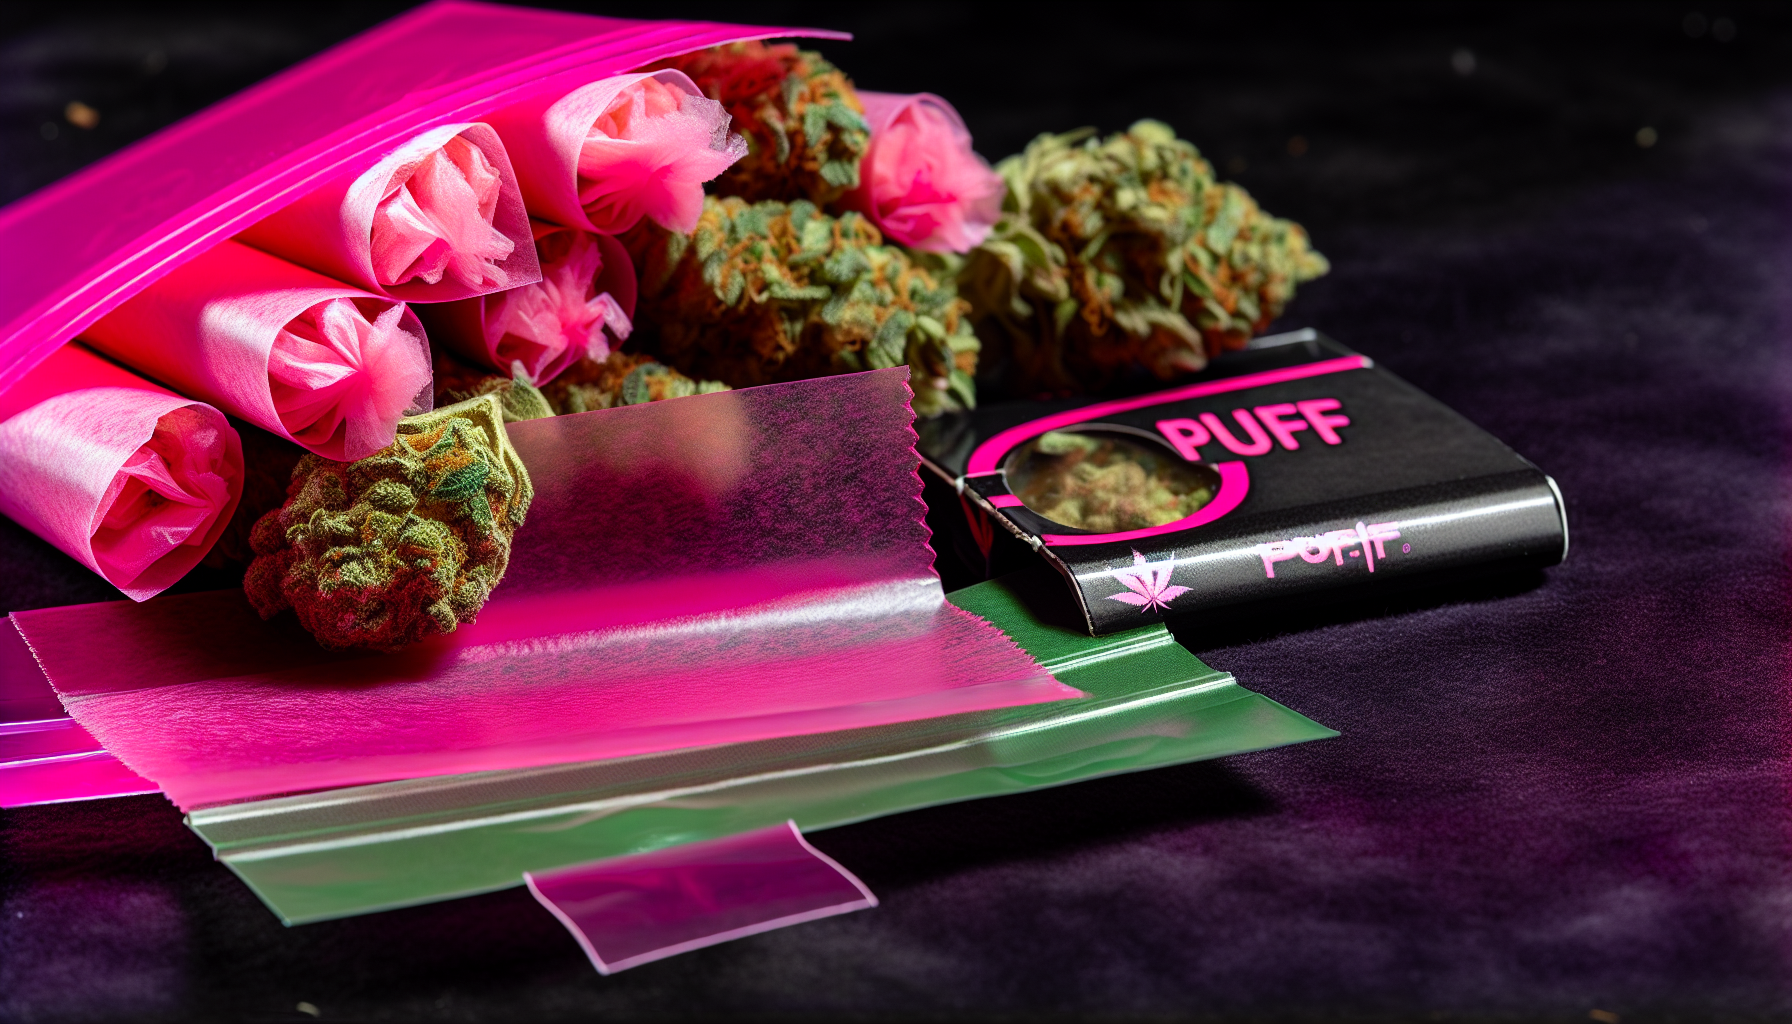 A pack of pink rolling papers and cones with cannabis buds